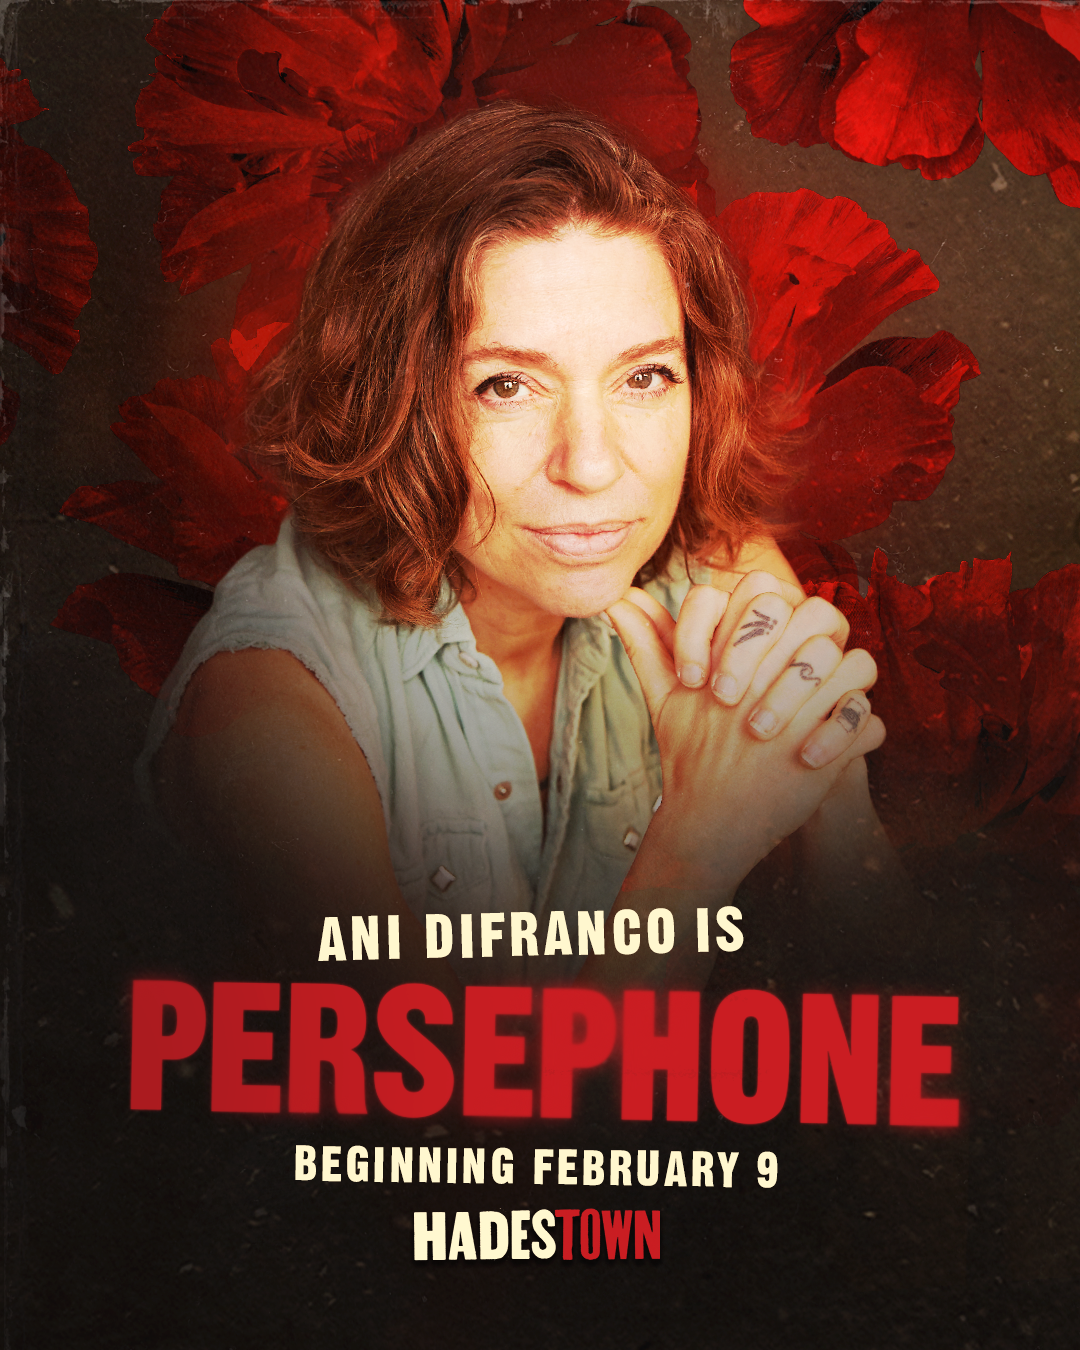 Ani DiFranco To Make Broadway Debut as ‘Persephone’ in the TONY Award®-Winning Best Musical “Hadestown”